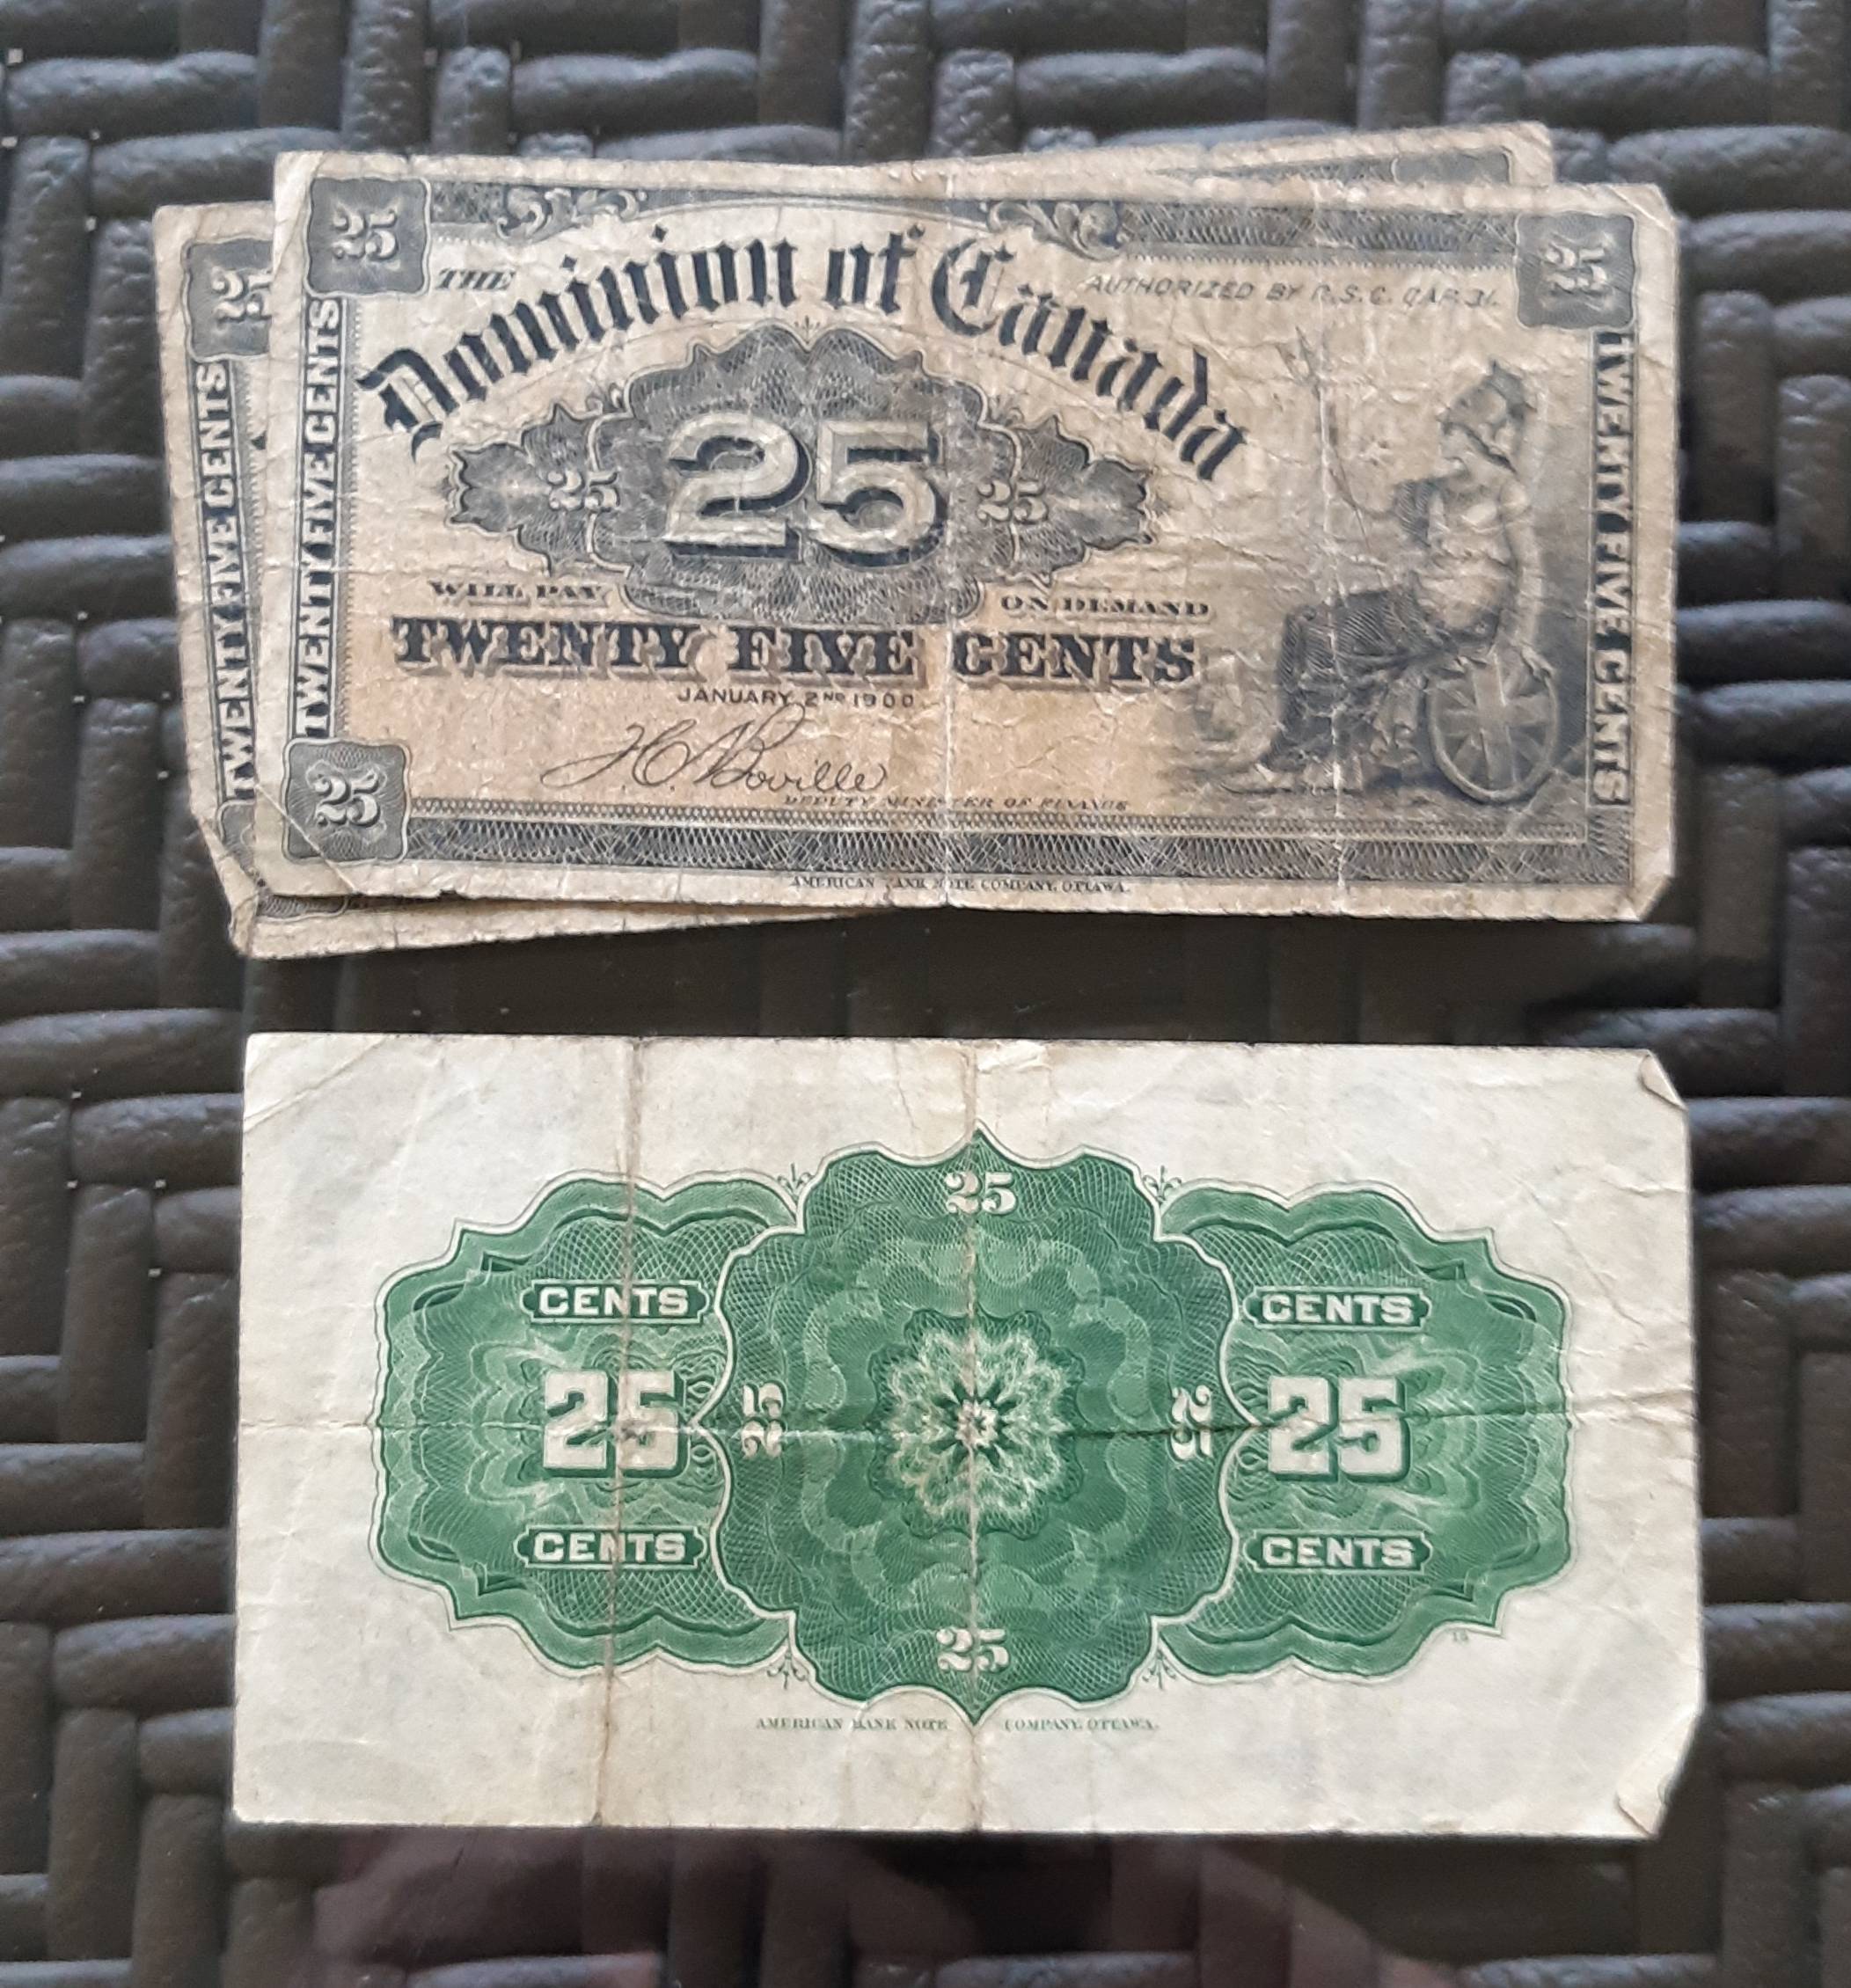 These+Canadian+25+cent+notes+from+1900